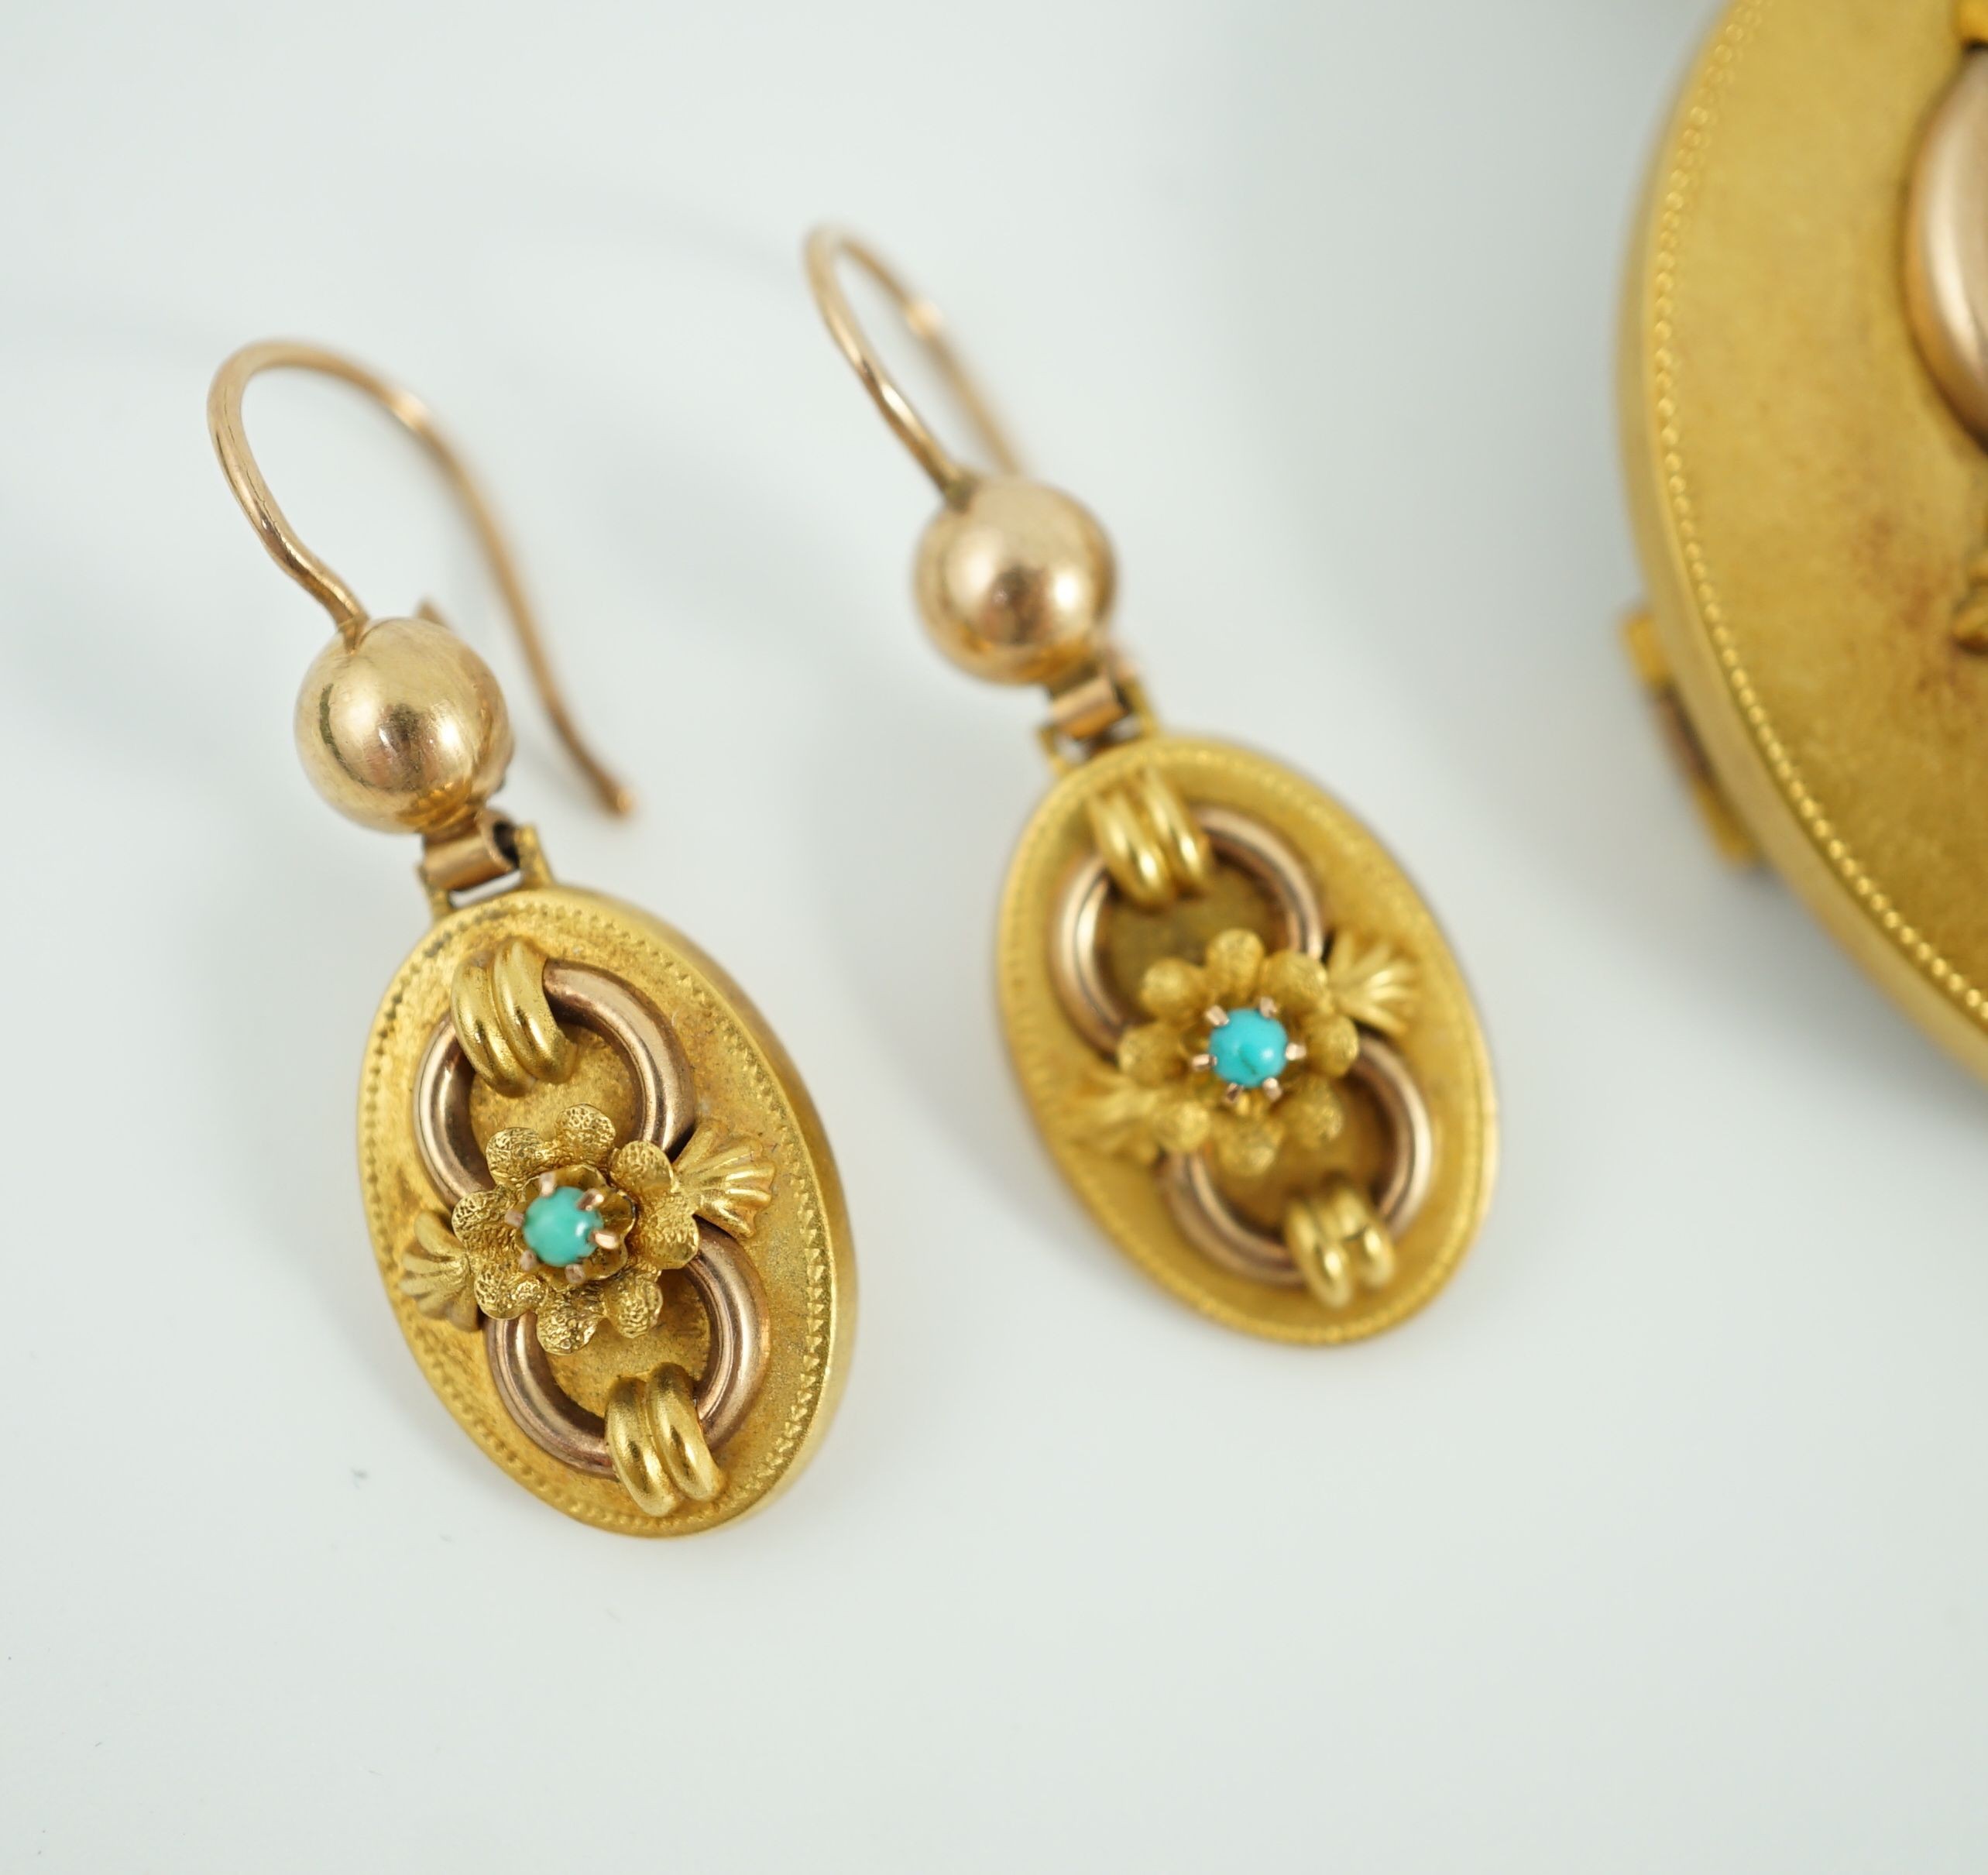 A late 19th century Austro-Hungarian 14k gold and turquoise set demi parure